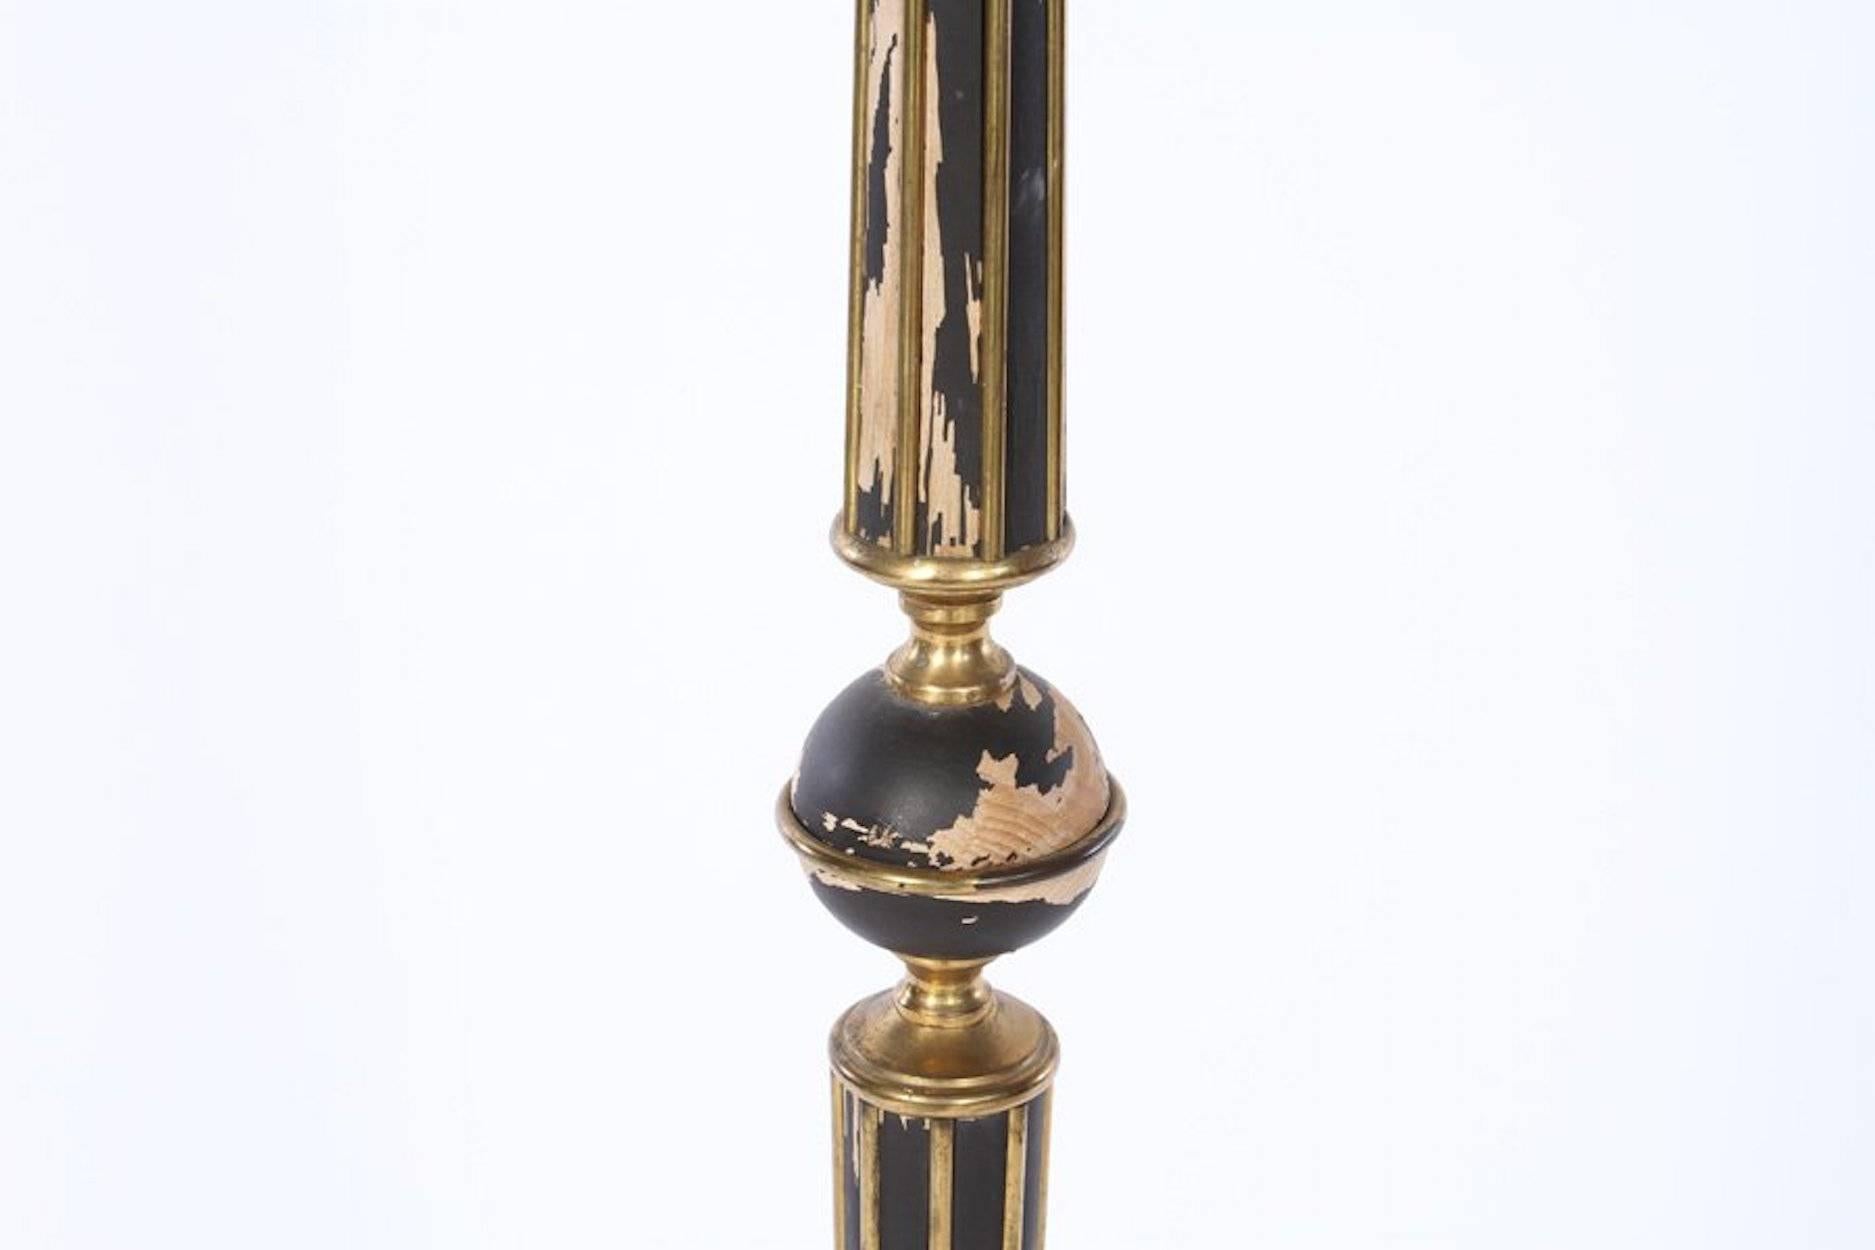 Gilbert Poillerat (attributed) 
France, 1945

Floor lamp; black painted wood standard with brass inlay; resting on four legs of brass and iron. 

Dimensions: H 61.5